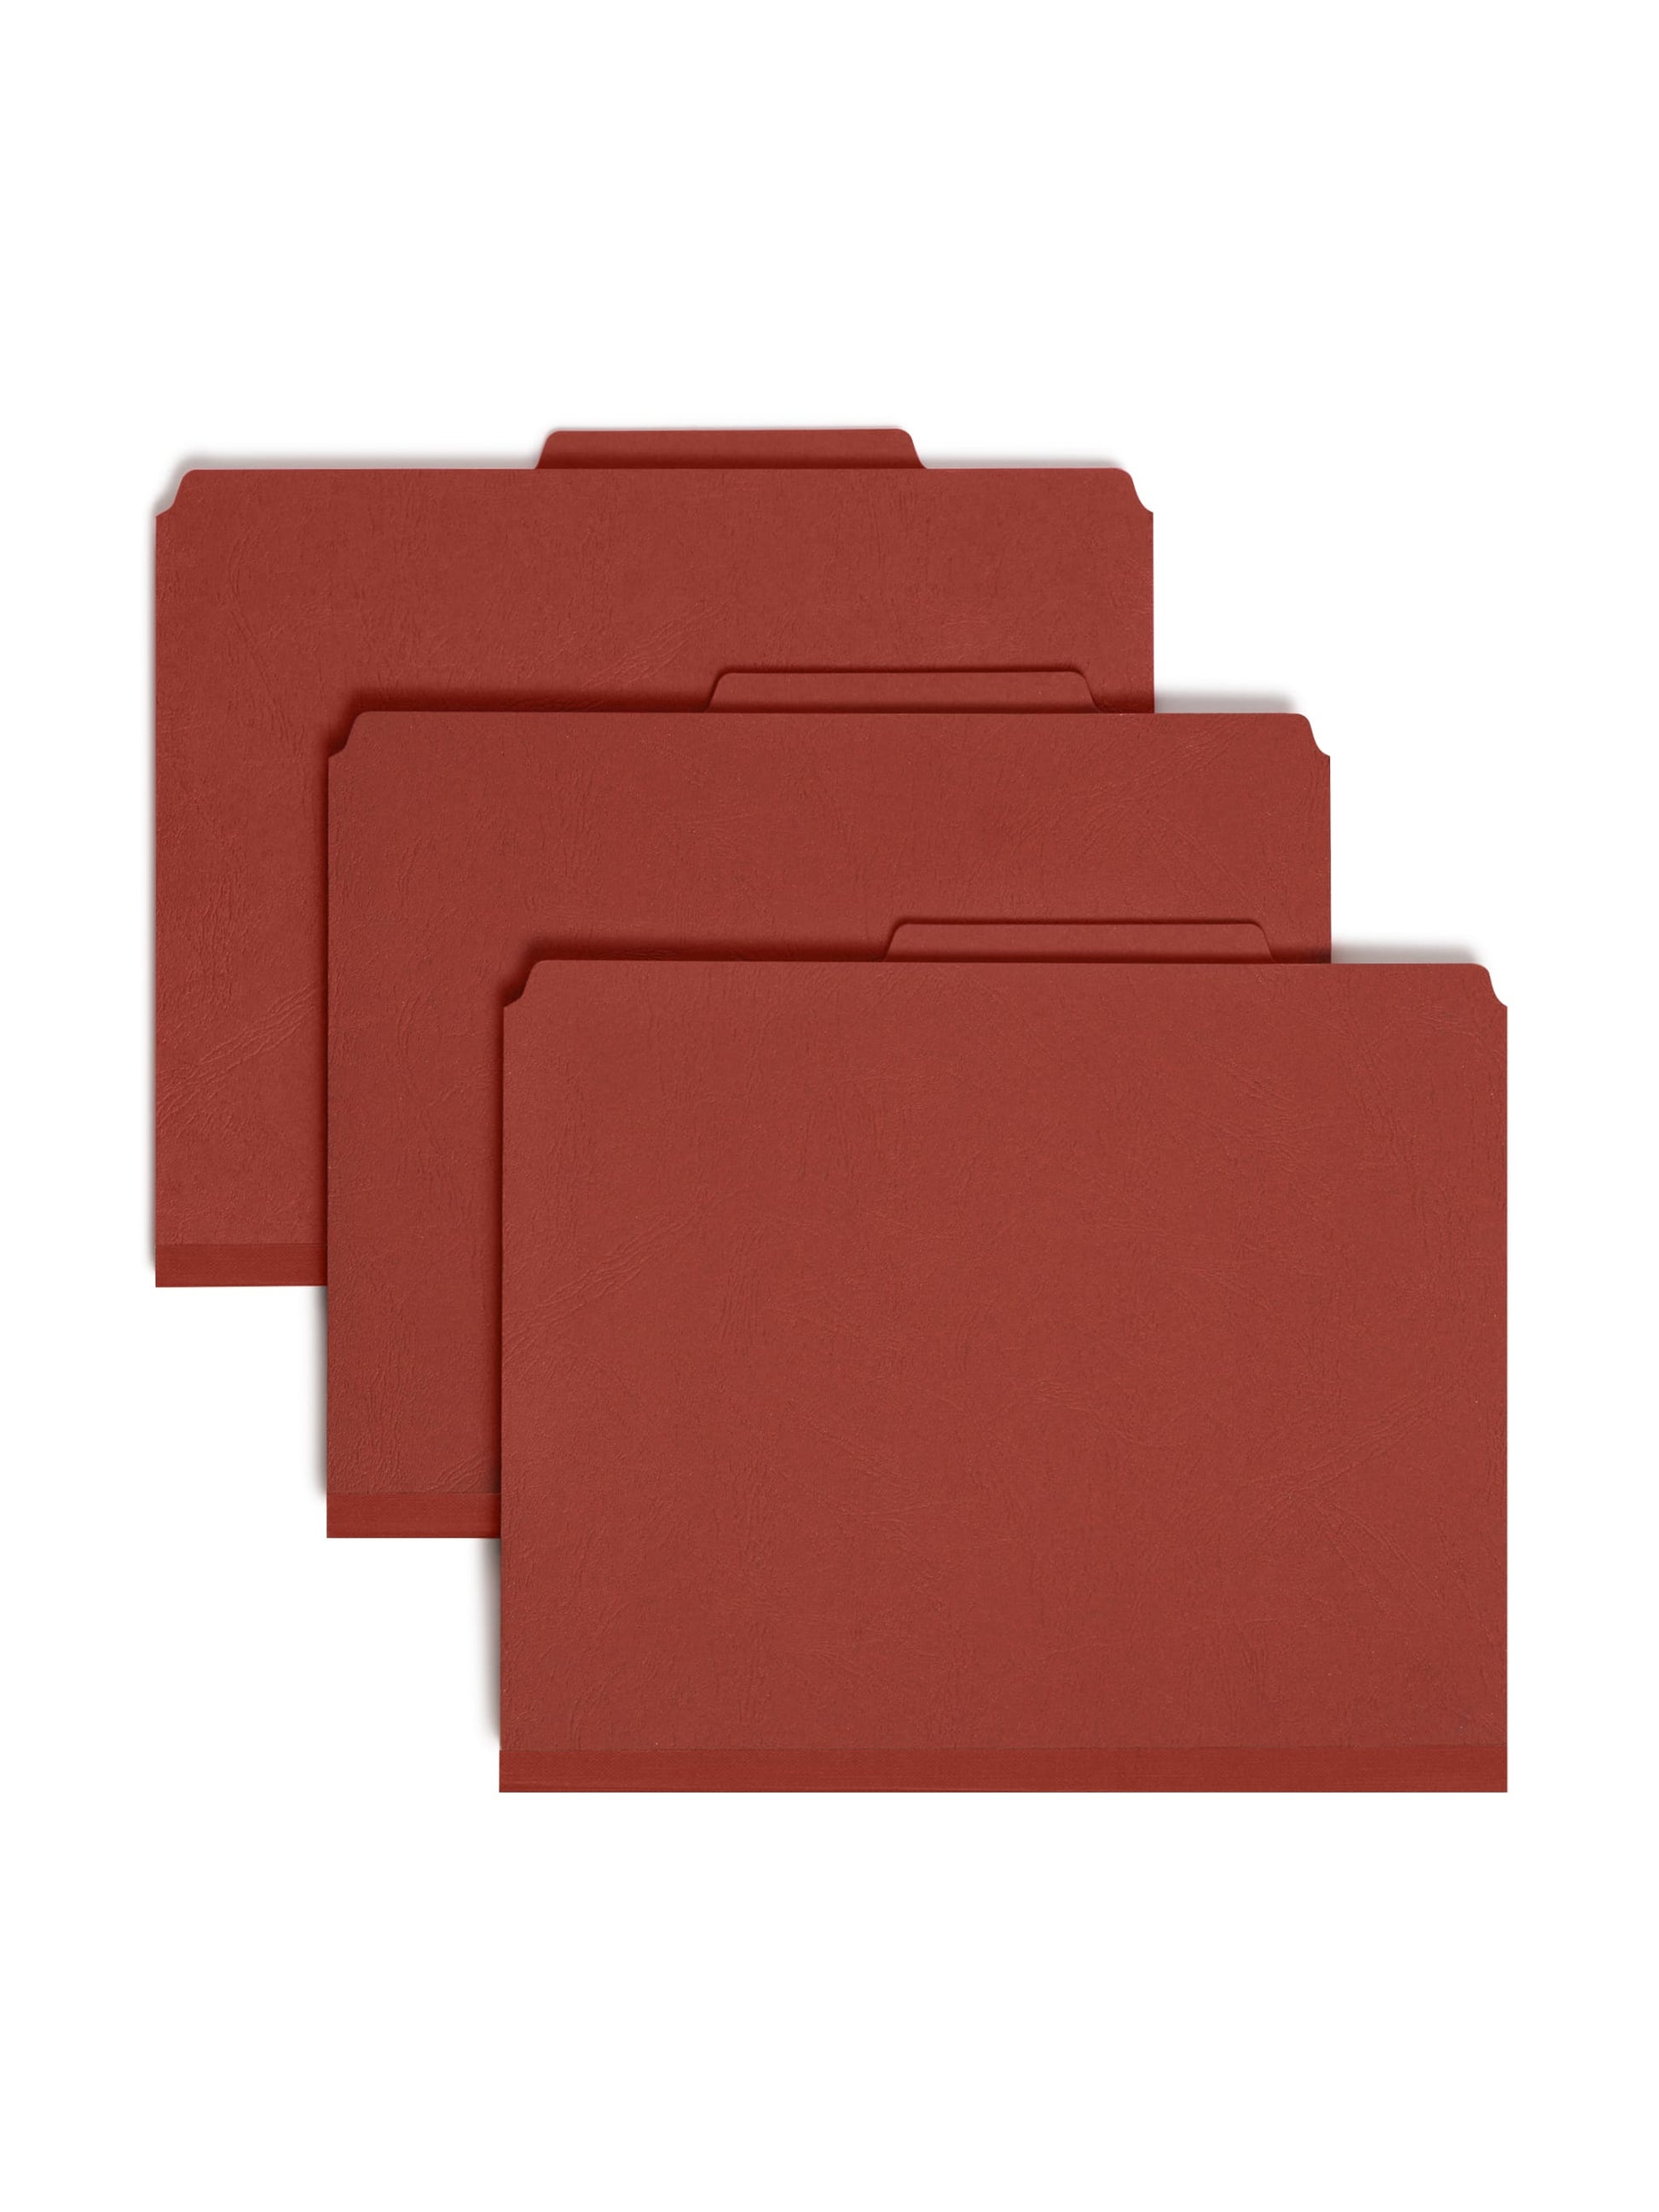 SafeSHIELD® Premium Pressboard Classification File Folders, 2 Dividers, 2 inch Expansion, 2/5-Cut Tab, Red Color, Letter Size, Set of 0, 30086486142053